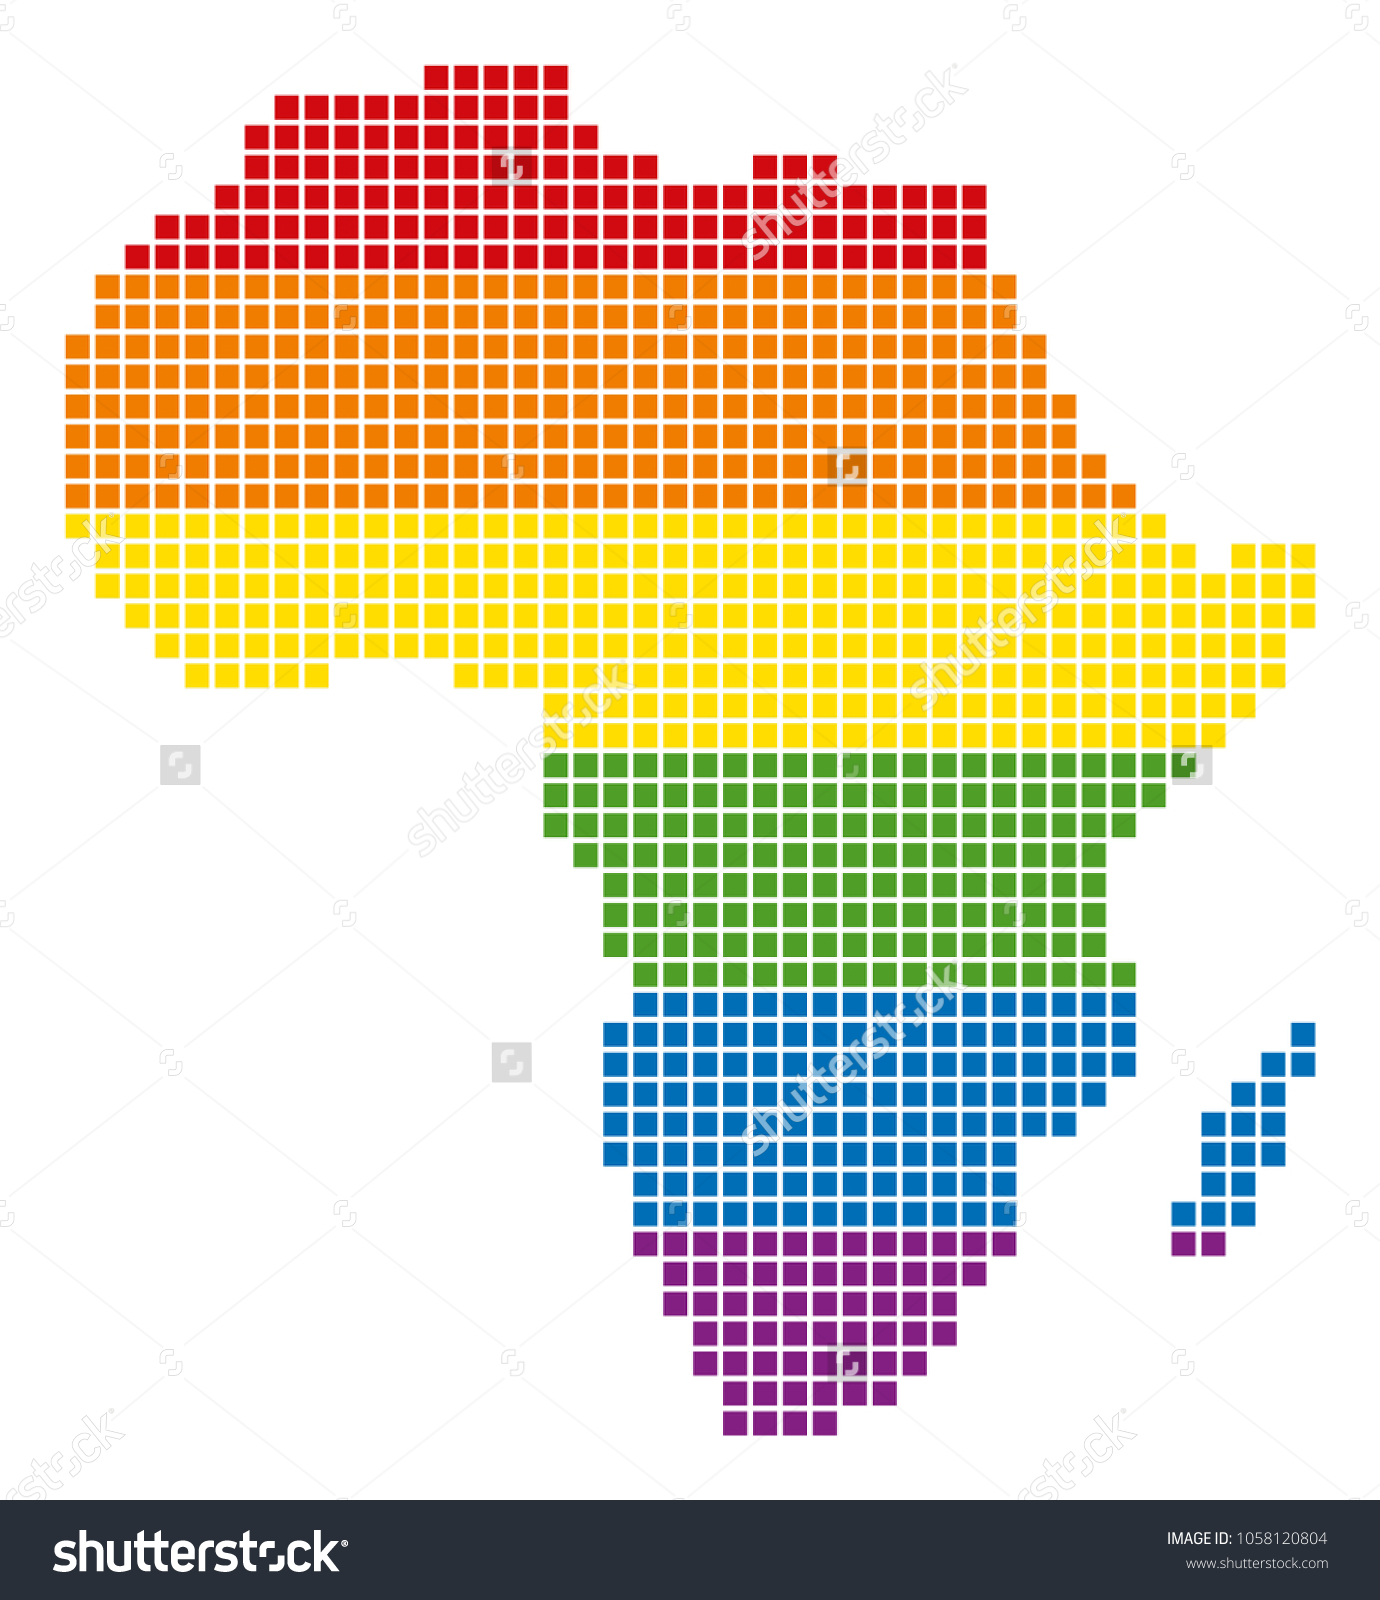 A Pixel Lgbt Pride Africa Map For Lesbians Gays Royalty Free Stock Vector 1058120804 6471